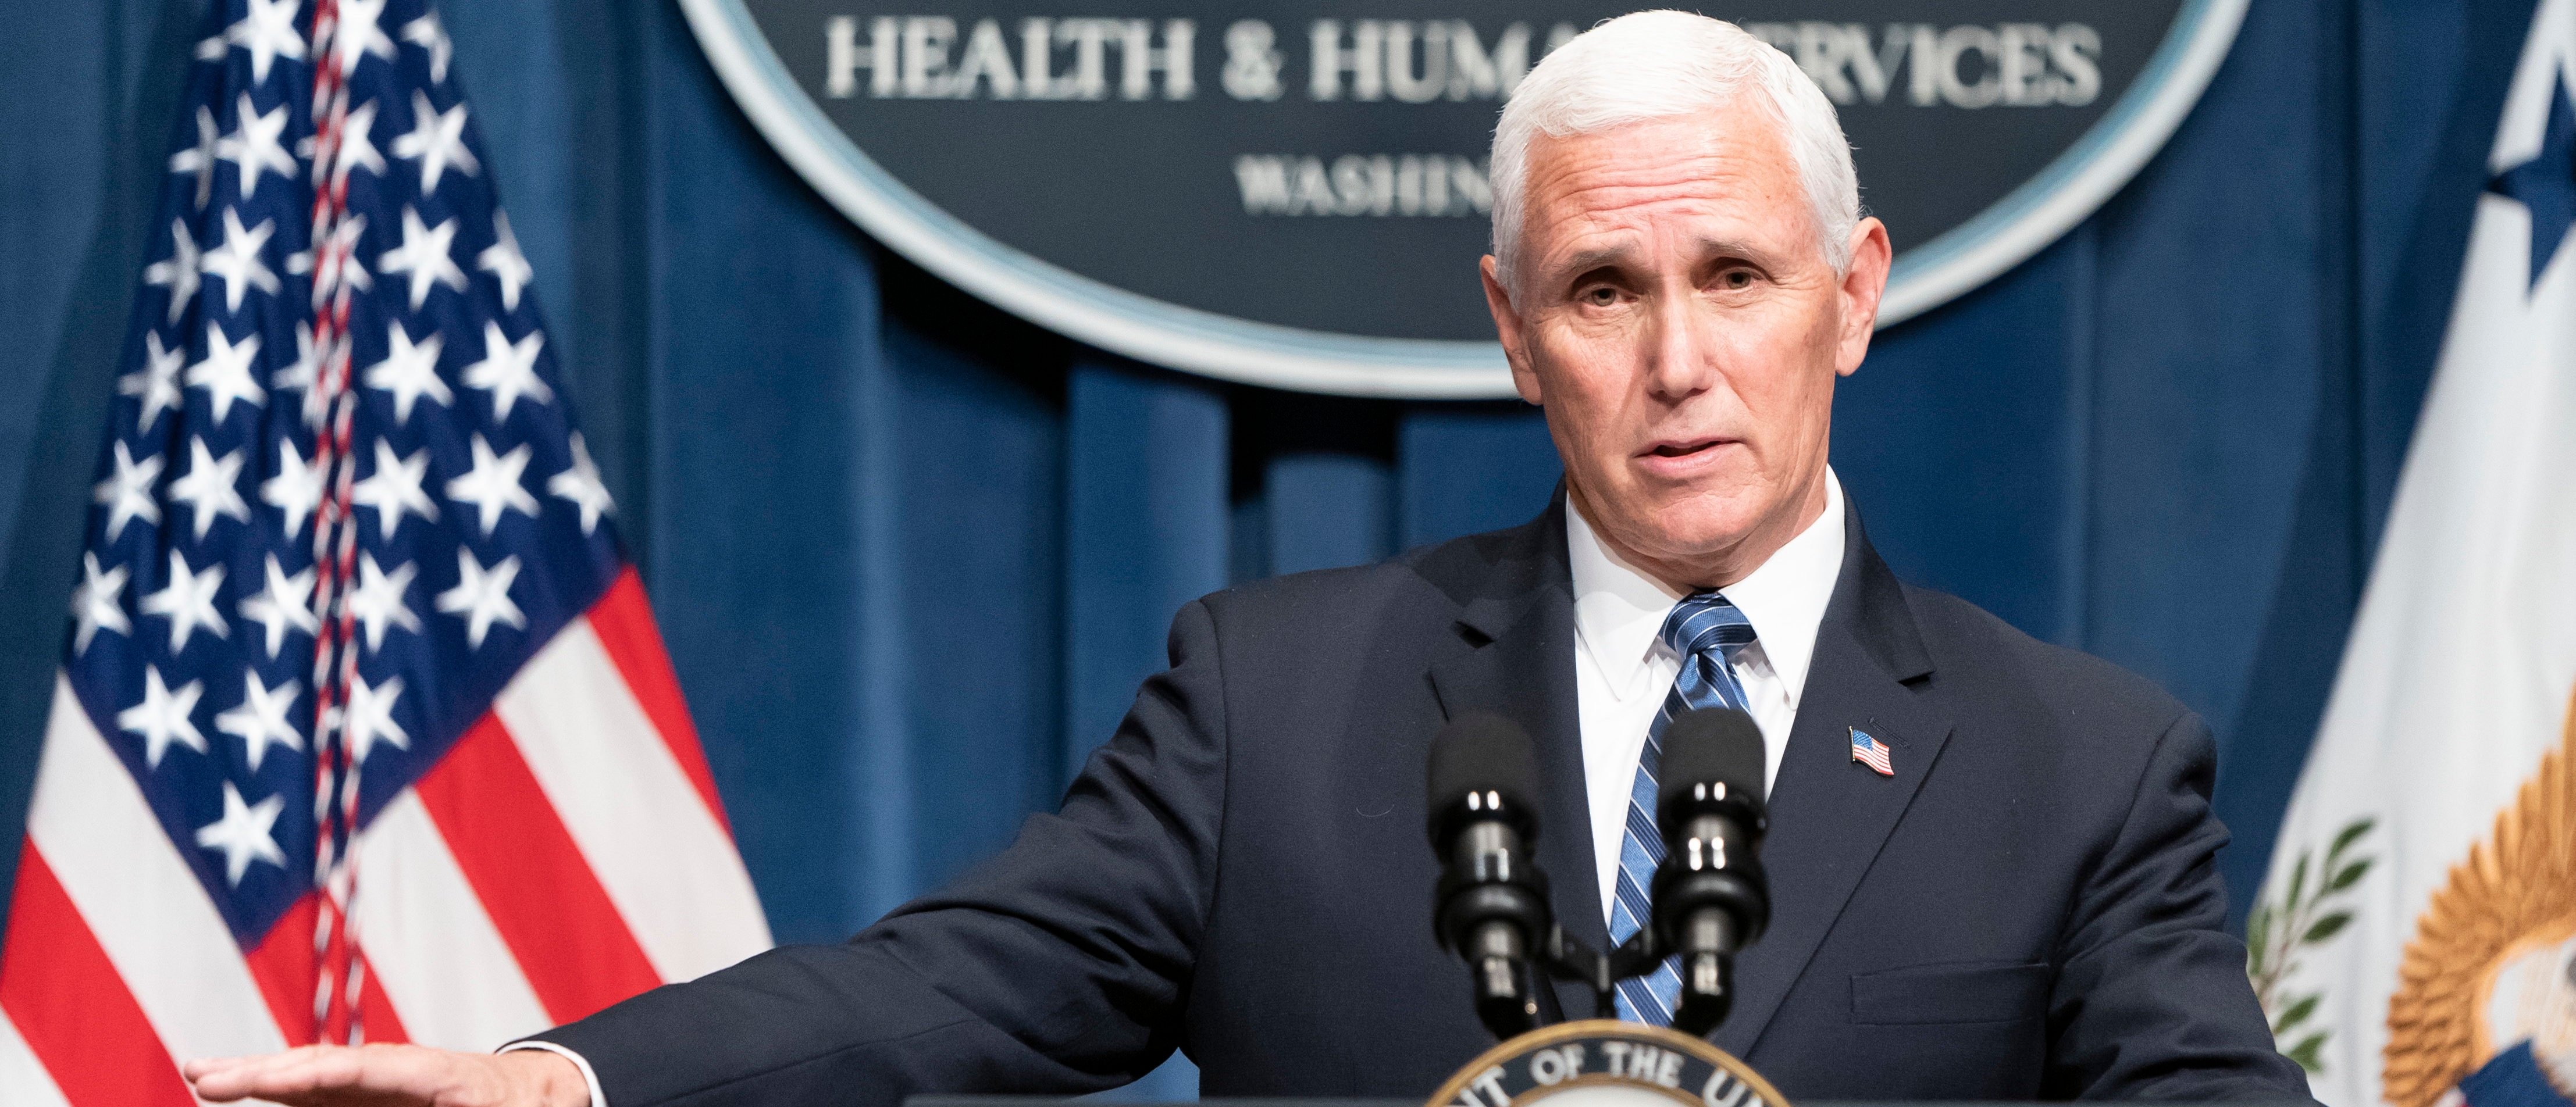 WASHINGTON, DC - JUNE 26: Vice President Mike Pence speaks after leading a White House Coronavirus Task Force briefing at the Department of Health and Human Services on June 26, 2020 in Washington, DC. Cases of coronavirus disease (COVID-19) are rising in southern and western states forcing businesses to remain closed. (Photo by Joshua Roberts/Getty Images)